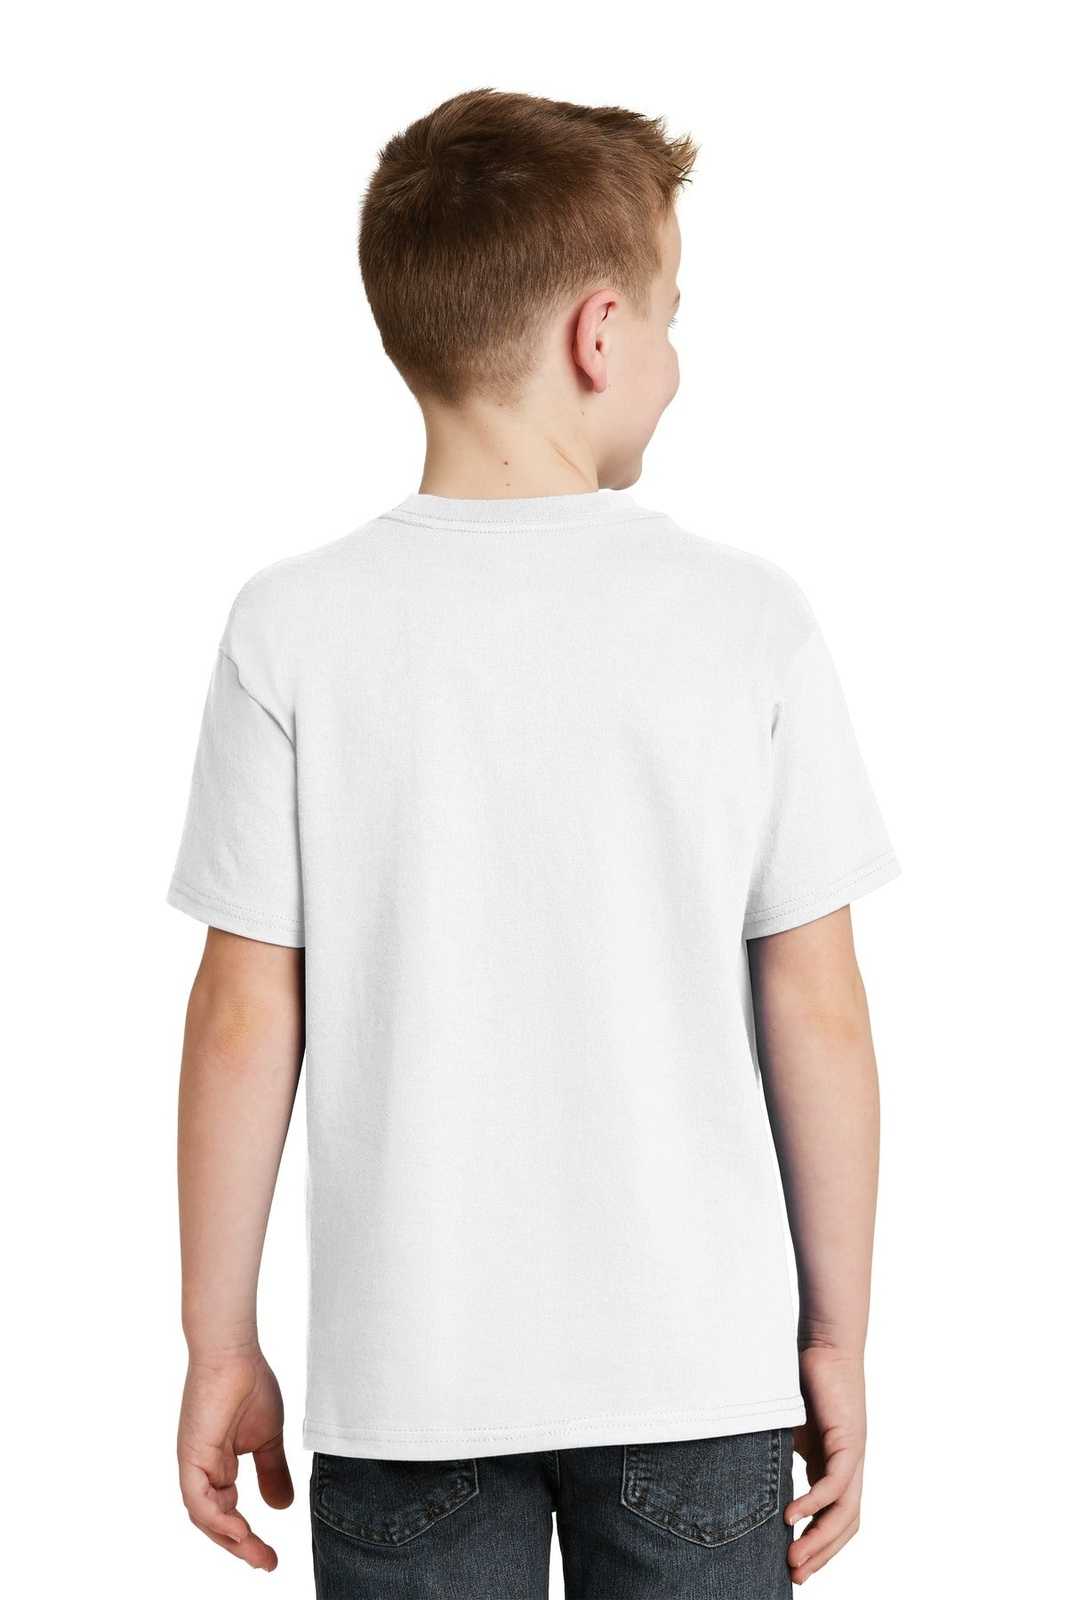 Hanes 5450 Youth Tagless 100% Cotton T-Shirt - White - HIT a Double